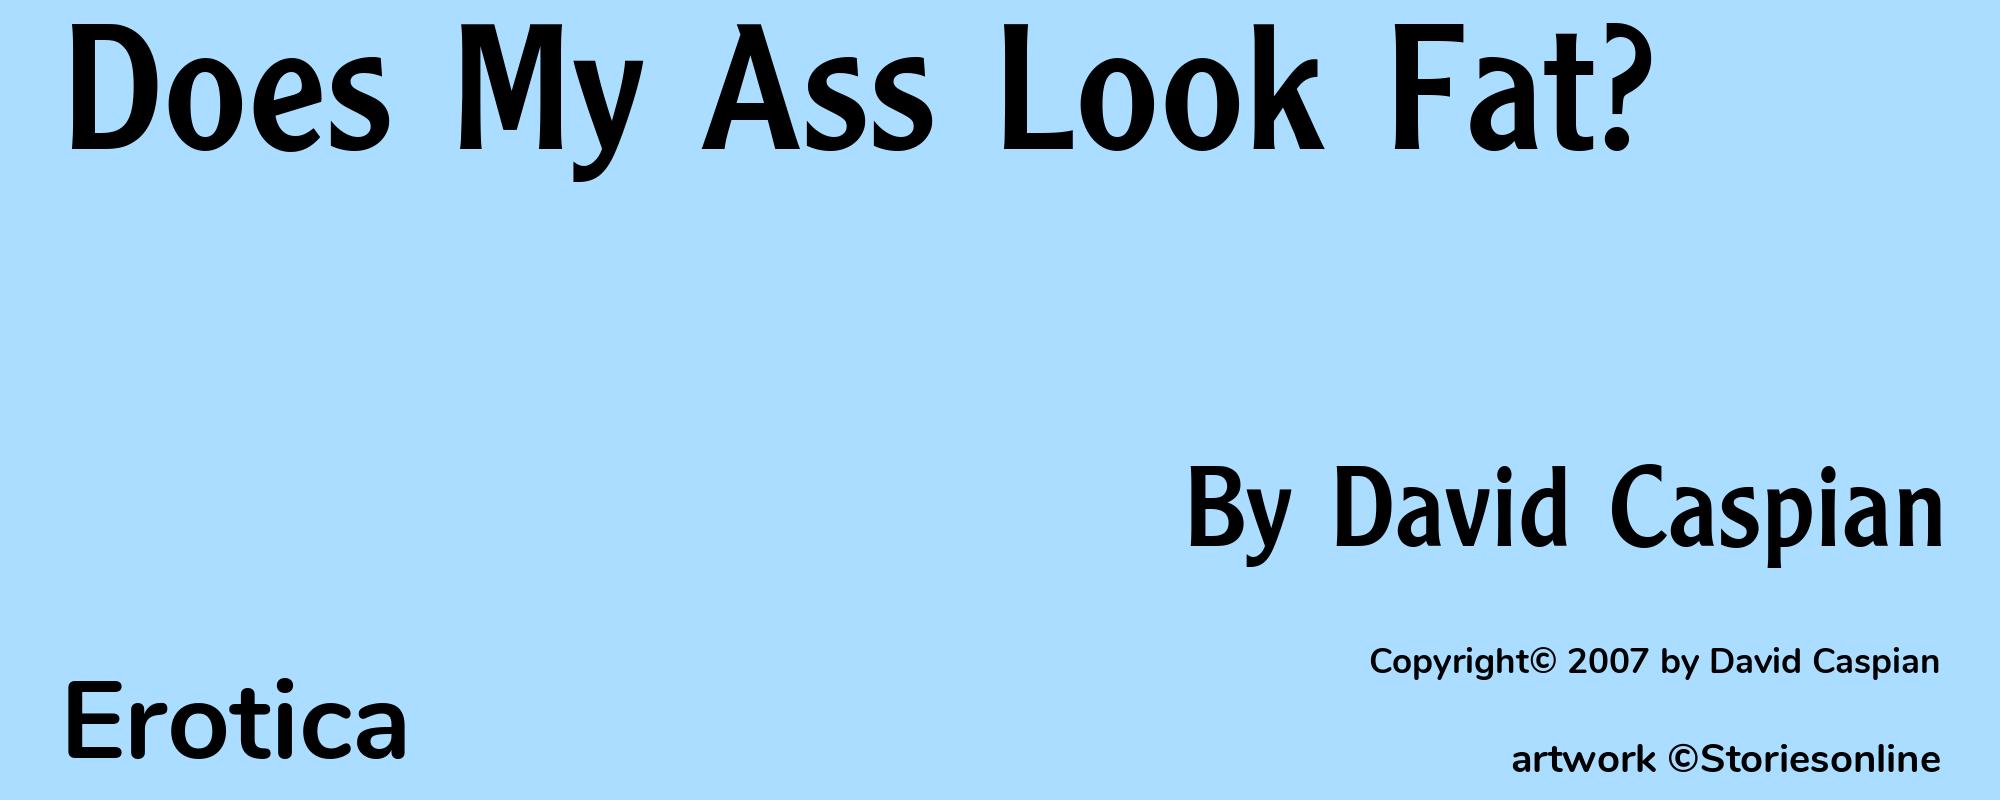 Does My Ass Look Fat? - Cover